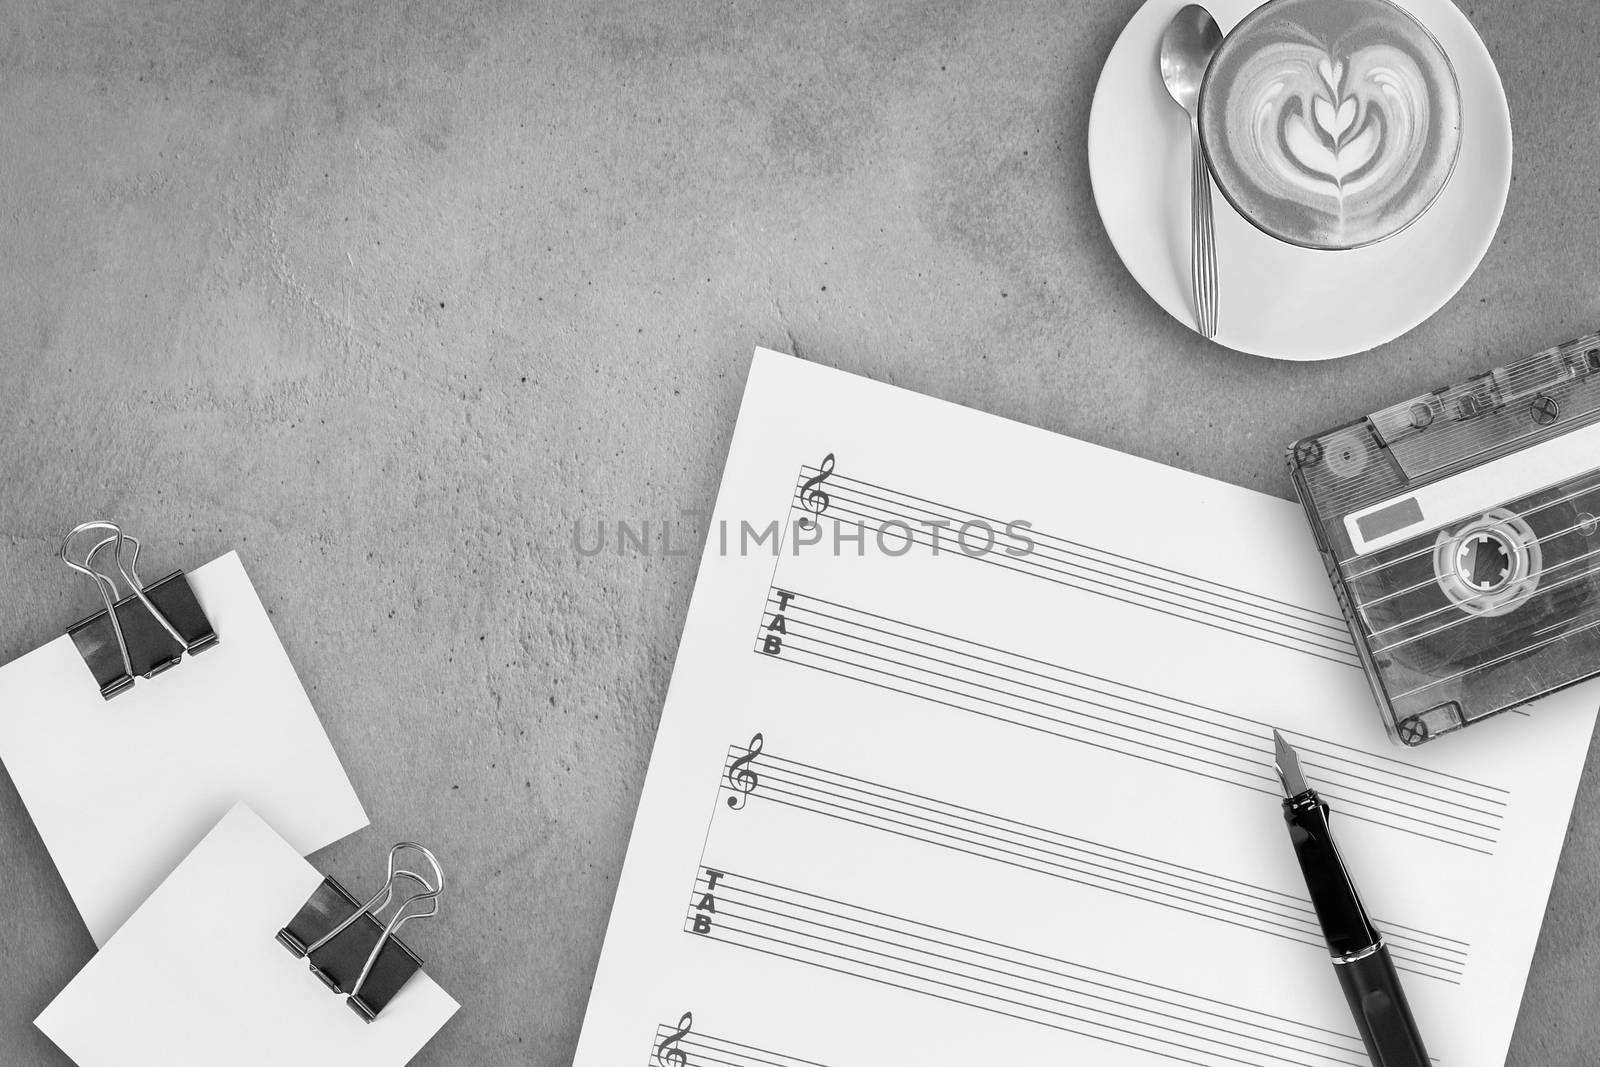 Sheet music, fountain pen, tape cassette and coffee latte on wooden table, top view picture